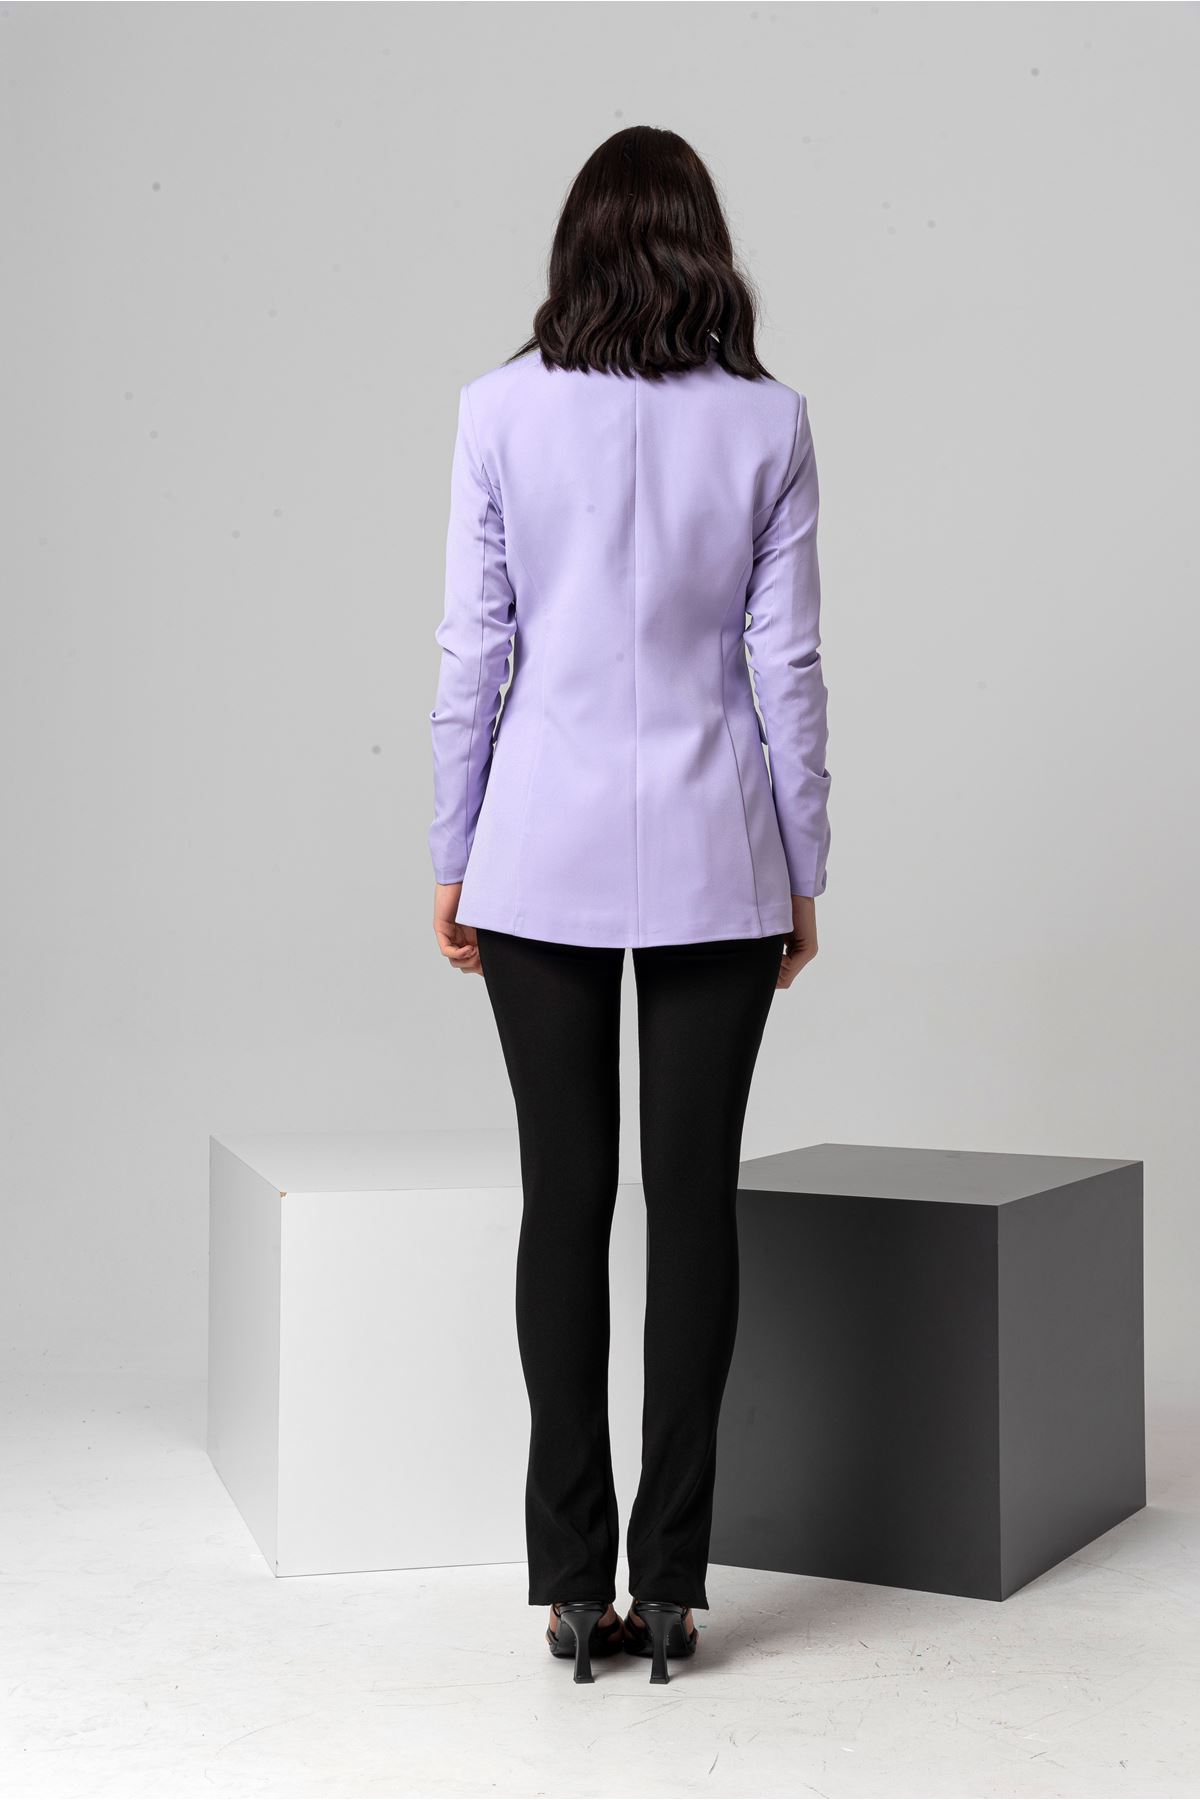 Polyester Fabric Hip Height Classical Shirred Sleeve Women Jacket - Lilac